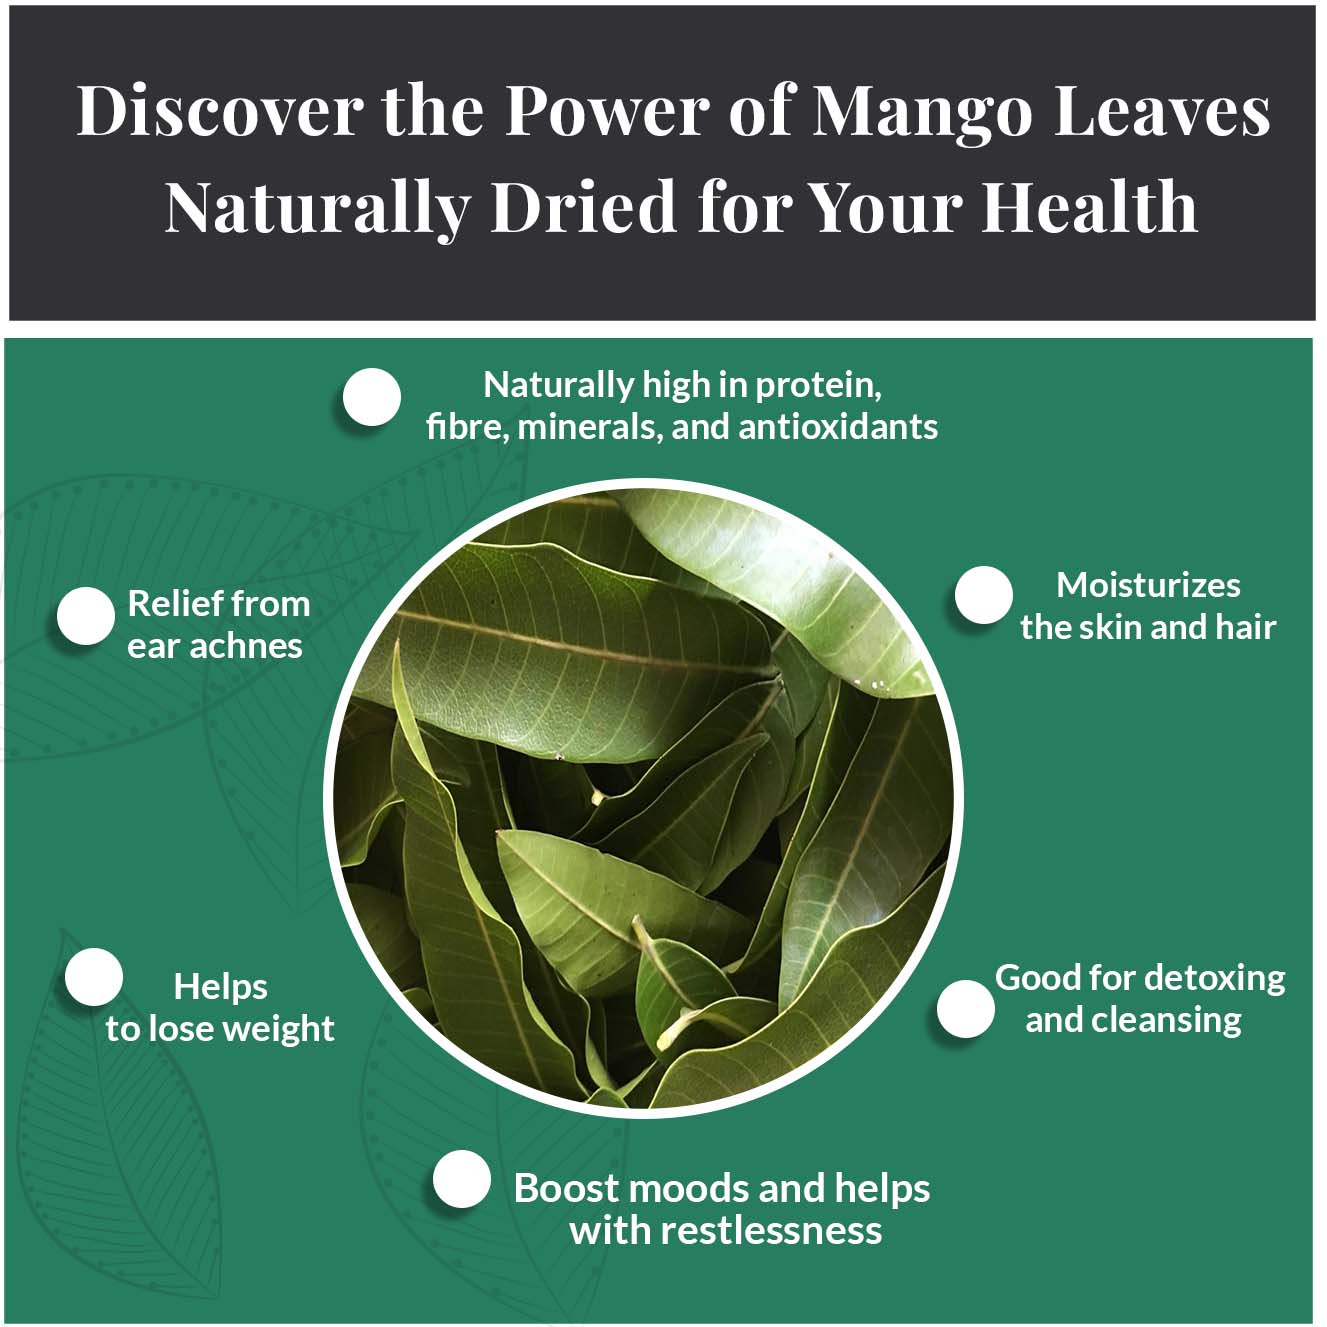 
                  
                    Discover the Power of Mango leaves Naturally dried for Your Health. - Naturally high in protein, fibre, minerals, and antixidants. - Moisturizes the skin and hair - Good for detoxing and cleansing - Boost moods and helps with restlessness - Helps to lose weight - Relief from ear achnes
                  
                